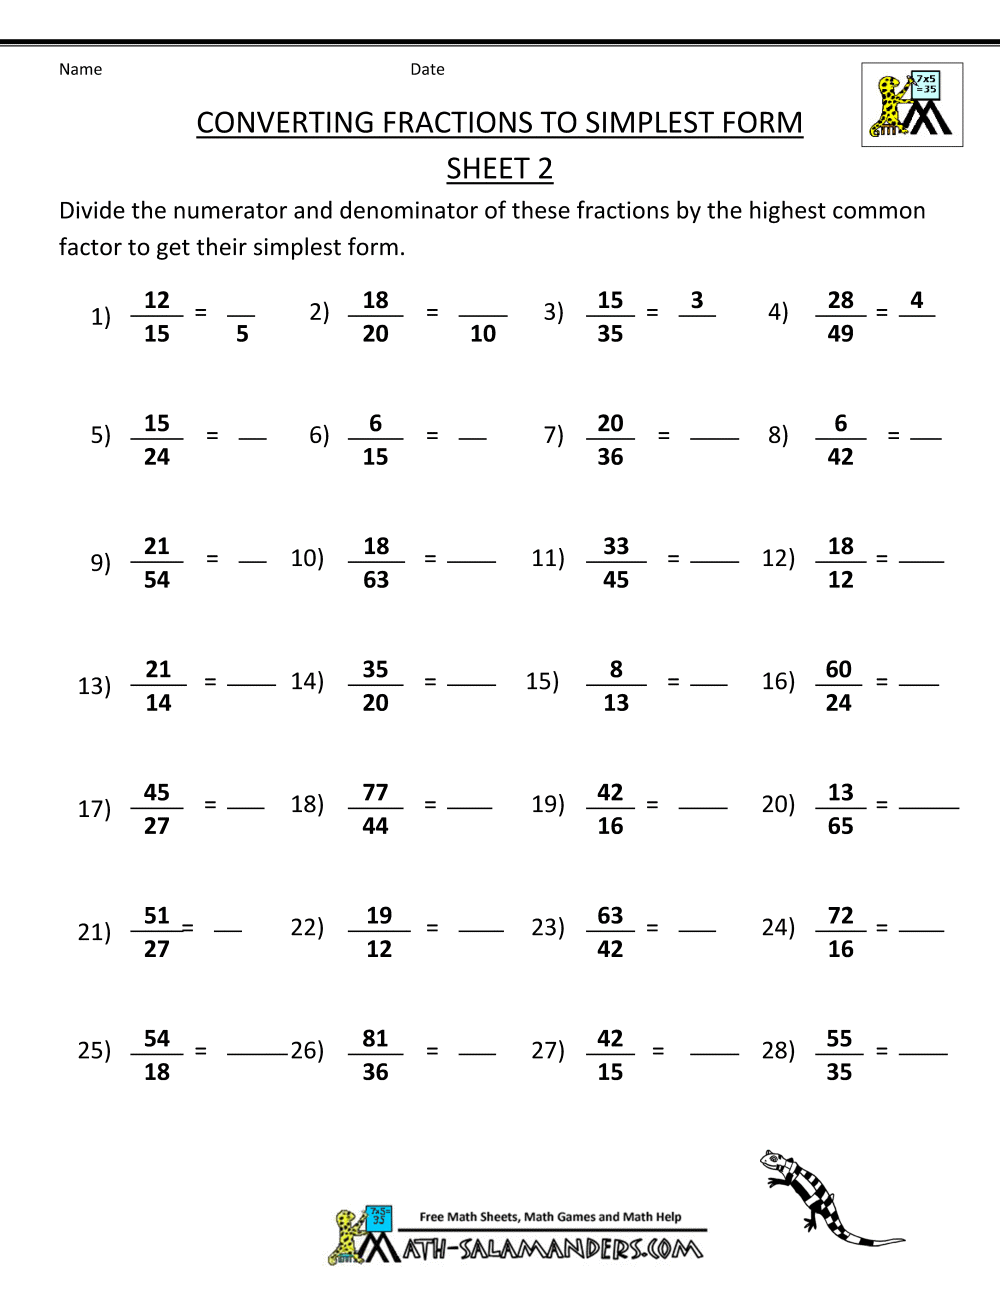 Simplify Fraction Converting Fractions To Simplest Form 2